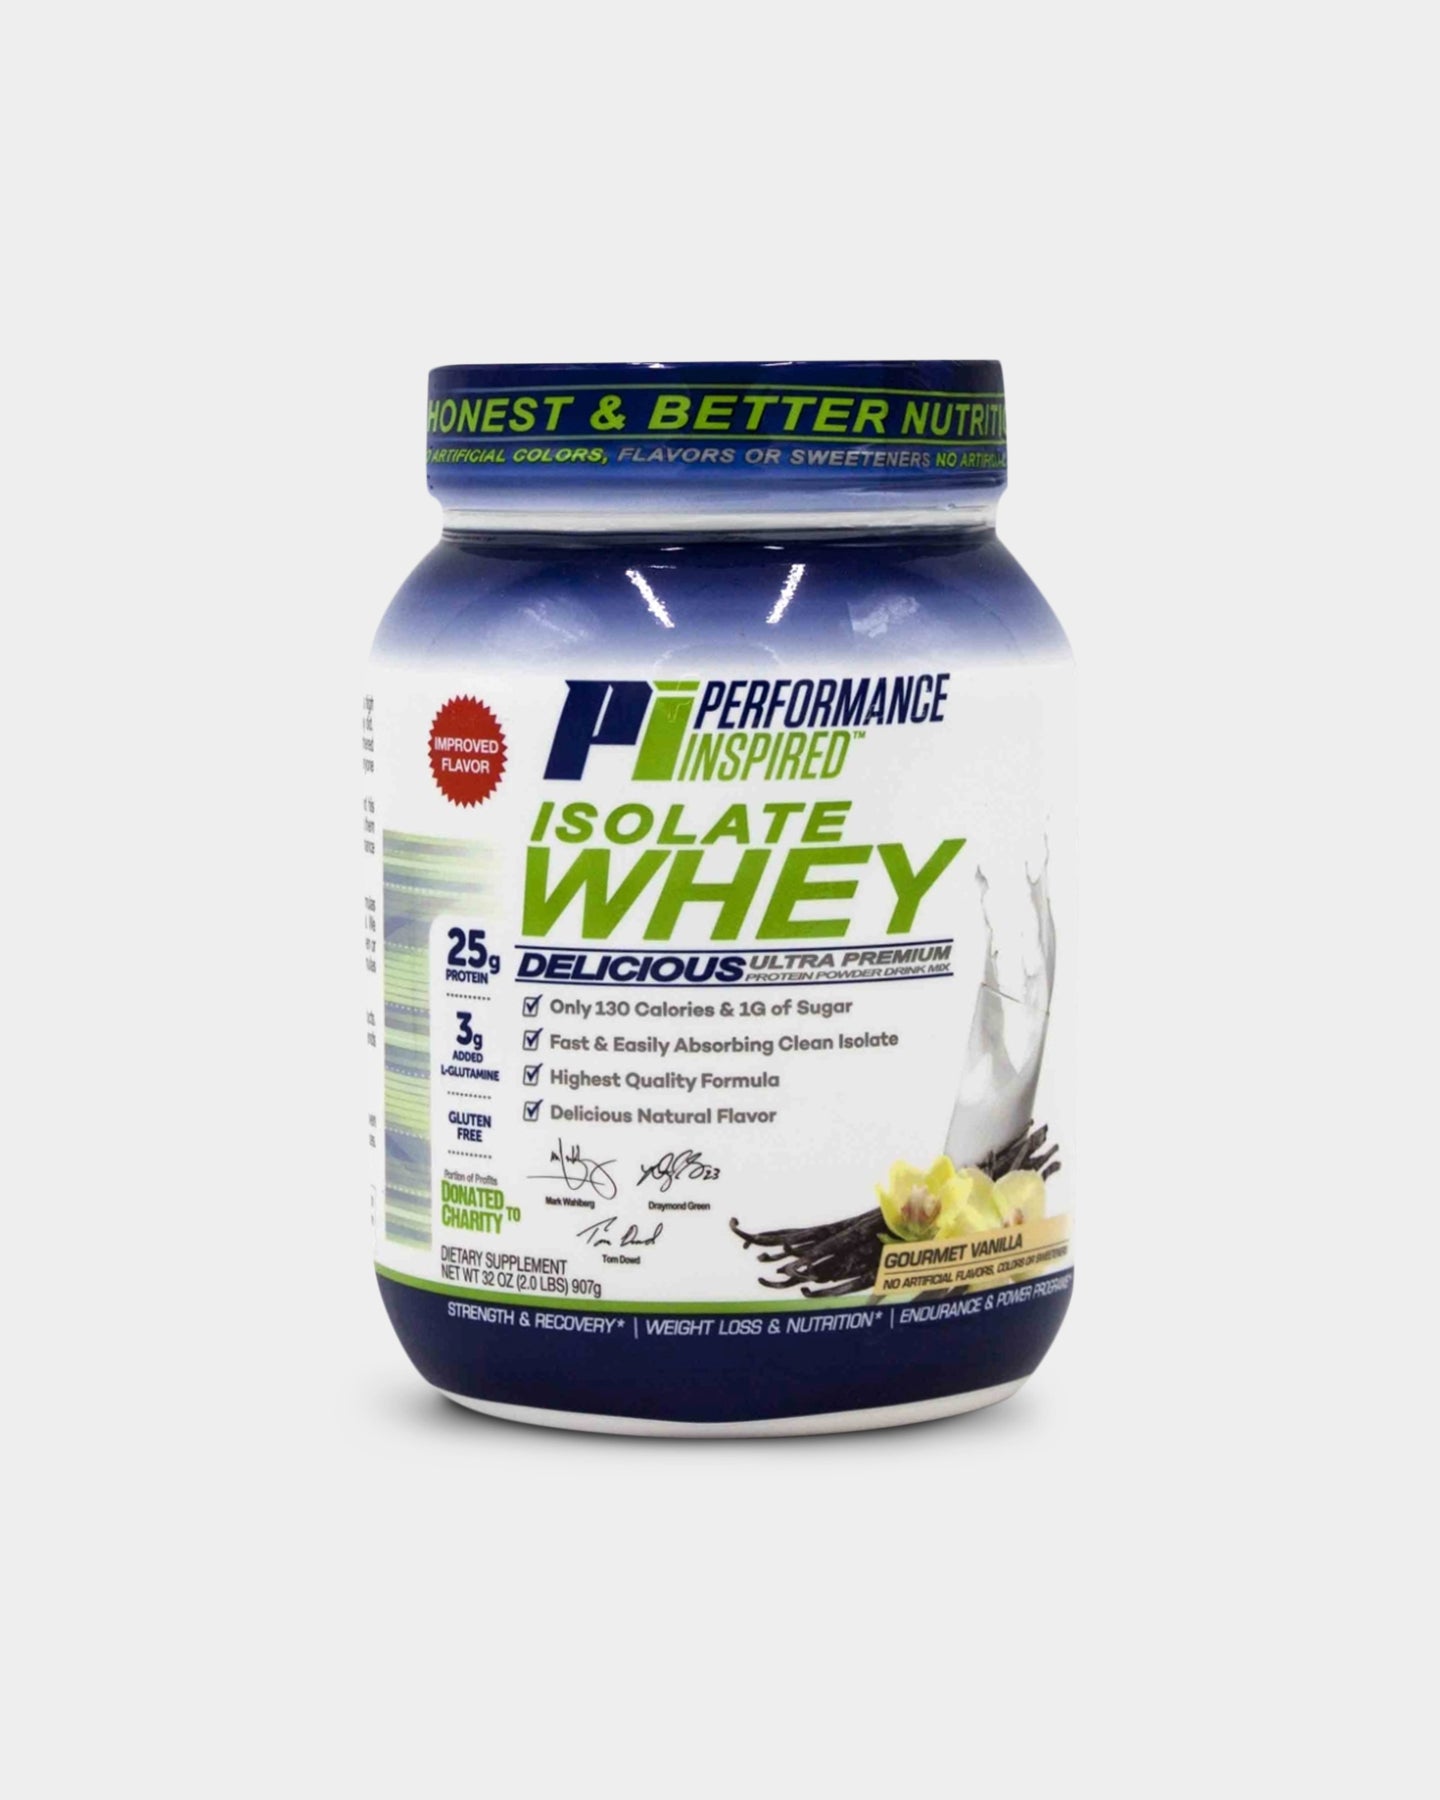 Performance Inspired Nutrition Performance Isolate Whey, Gourmet Vanilla, 2 Lbs. A1